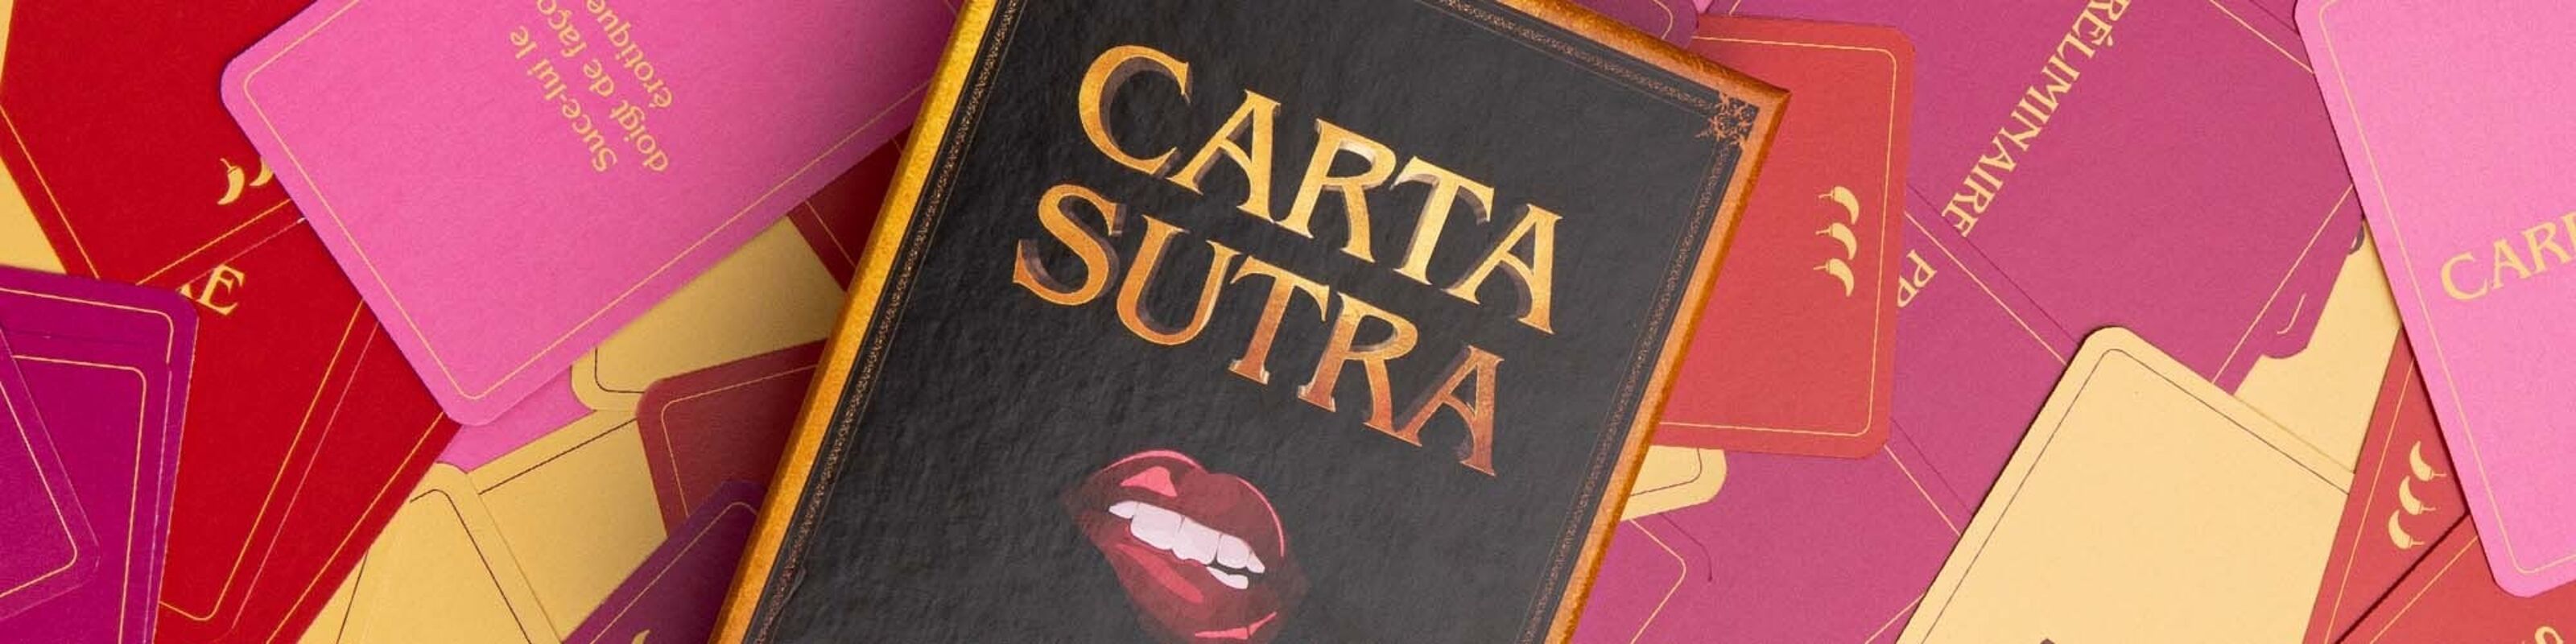 Buy Carta Sutra wholesale products on Ankorstore